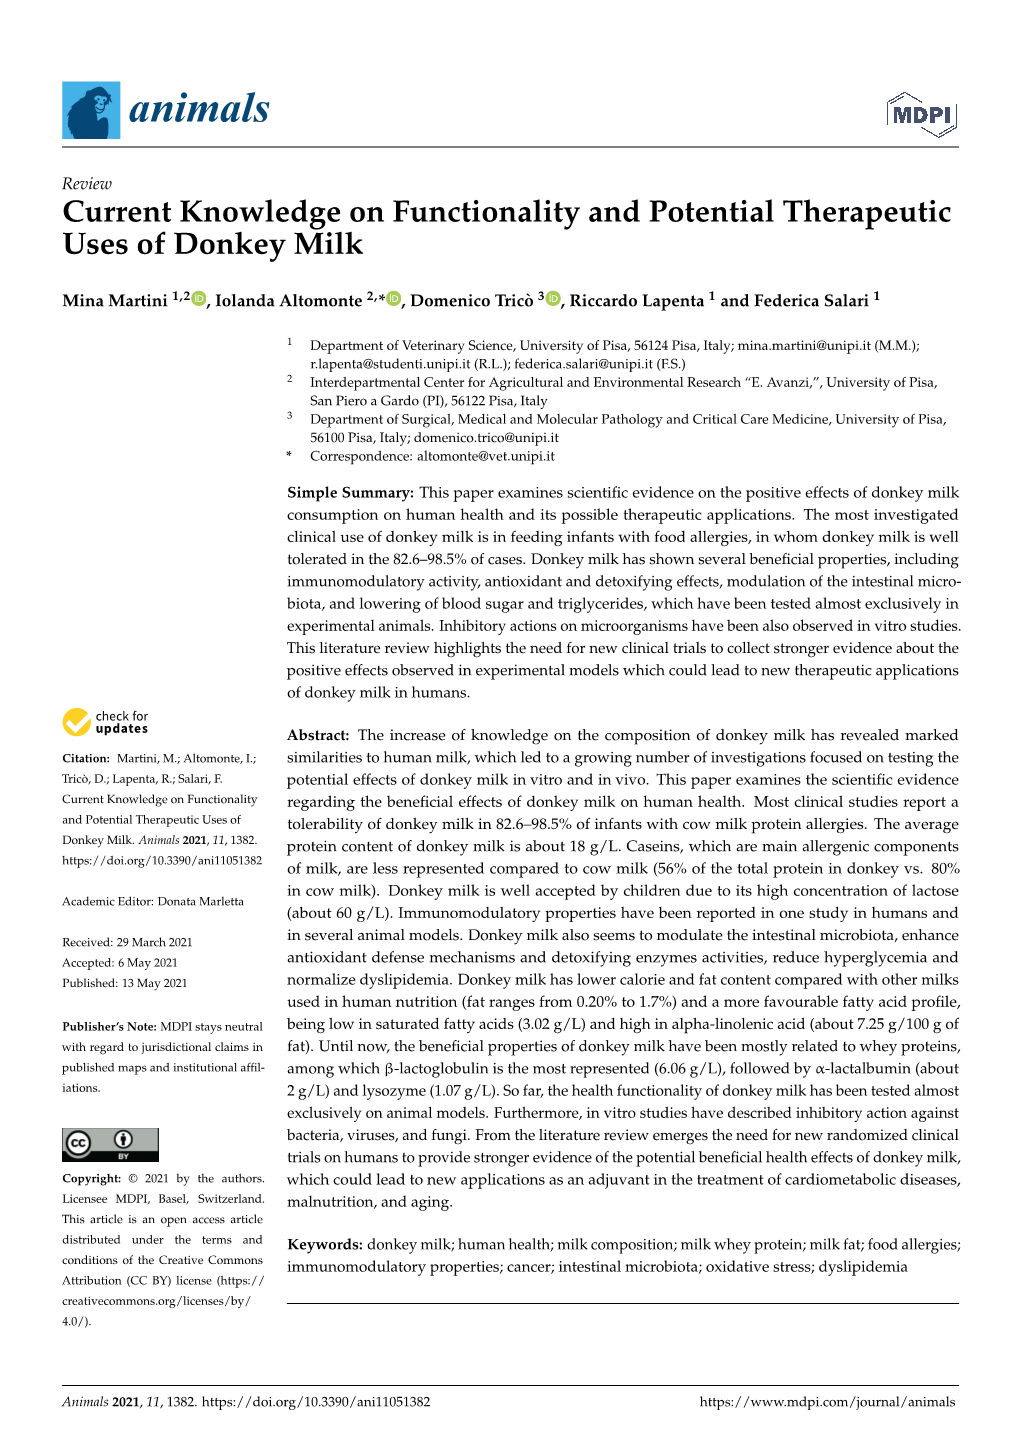 Current Knowledge on Functionality and Potential Therapeutic Uses of Donkey Milk